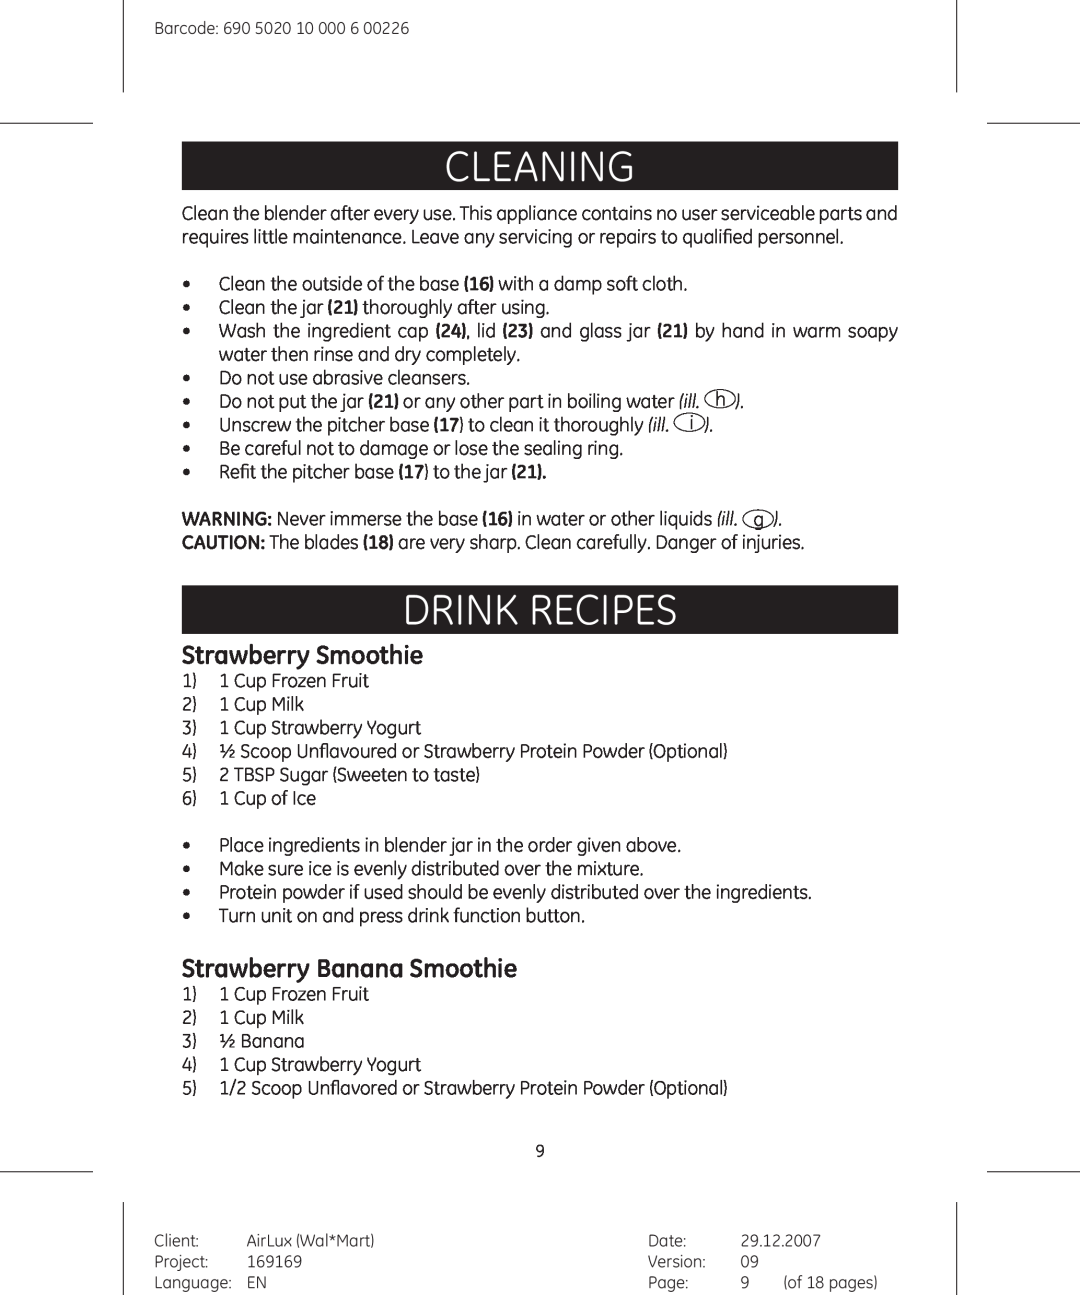 GE 169175, 169169 manual Cleaning, Drink RECIPES, Strawberry Smoothie, Strawberry Banana Smoothie 